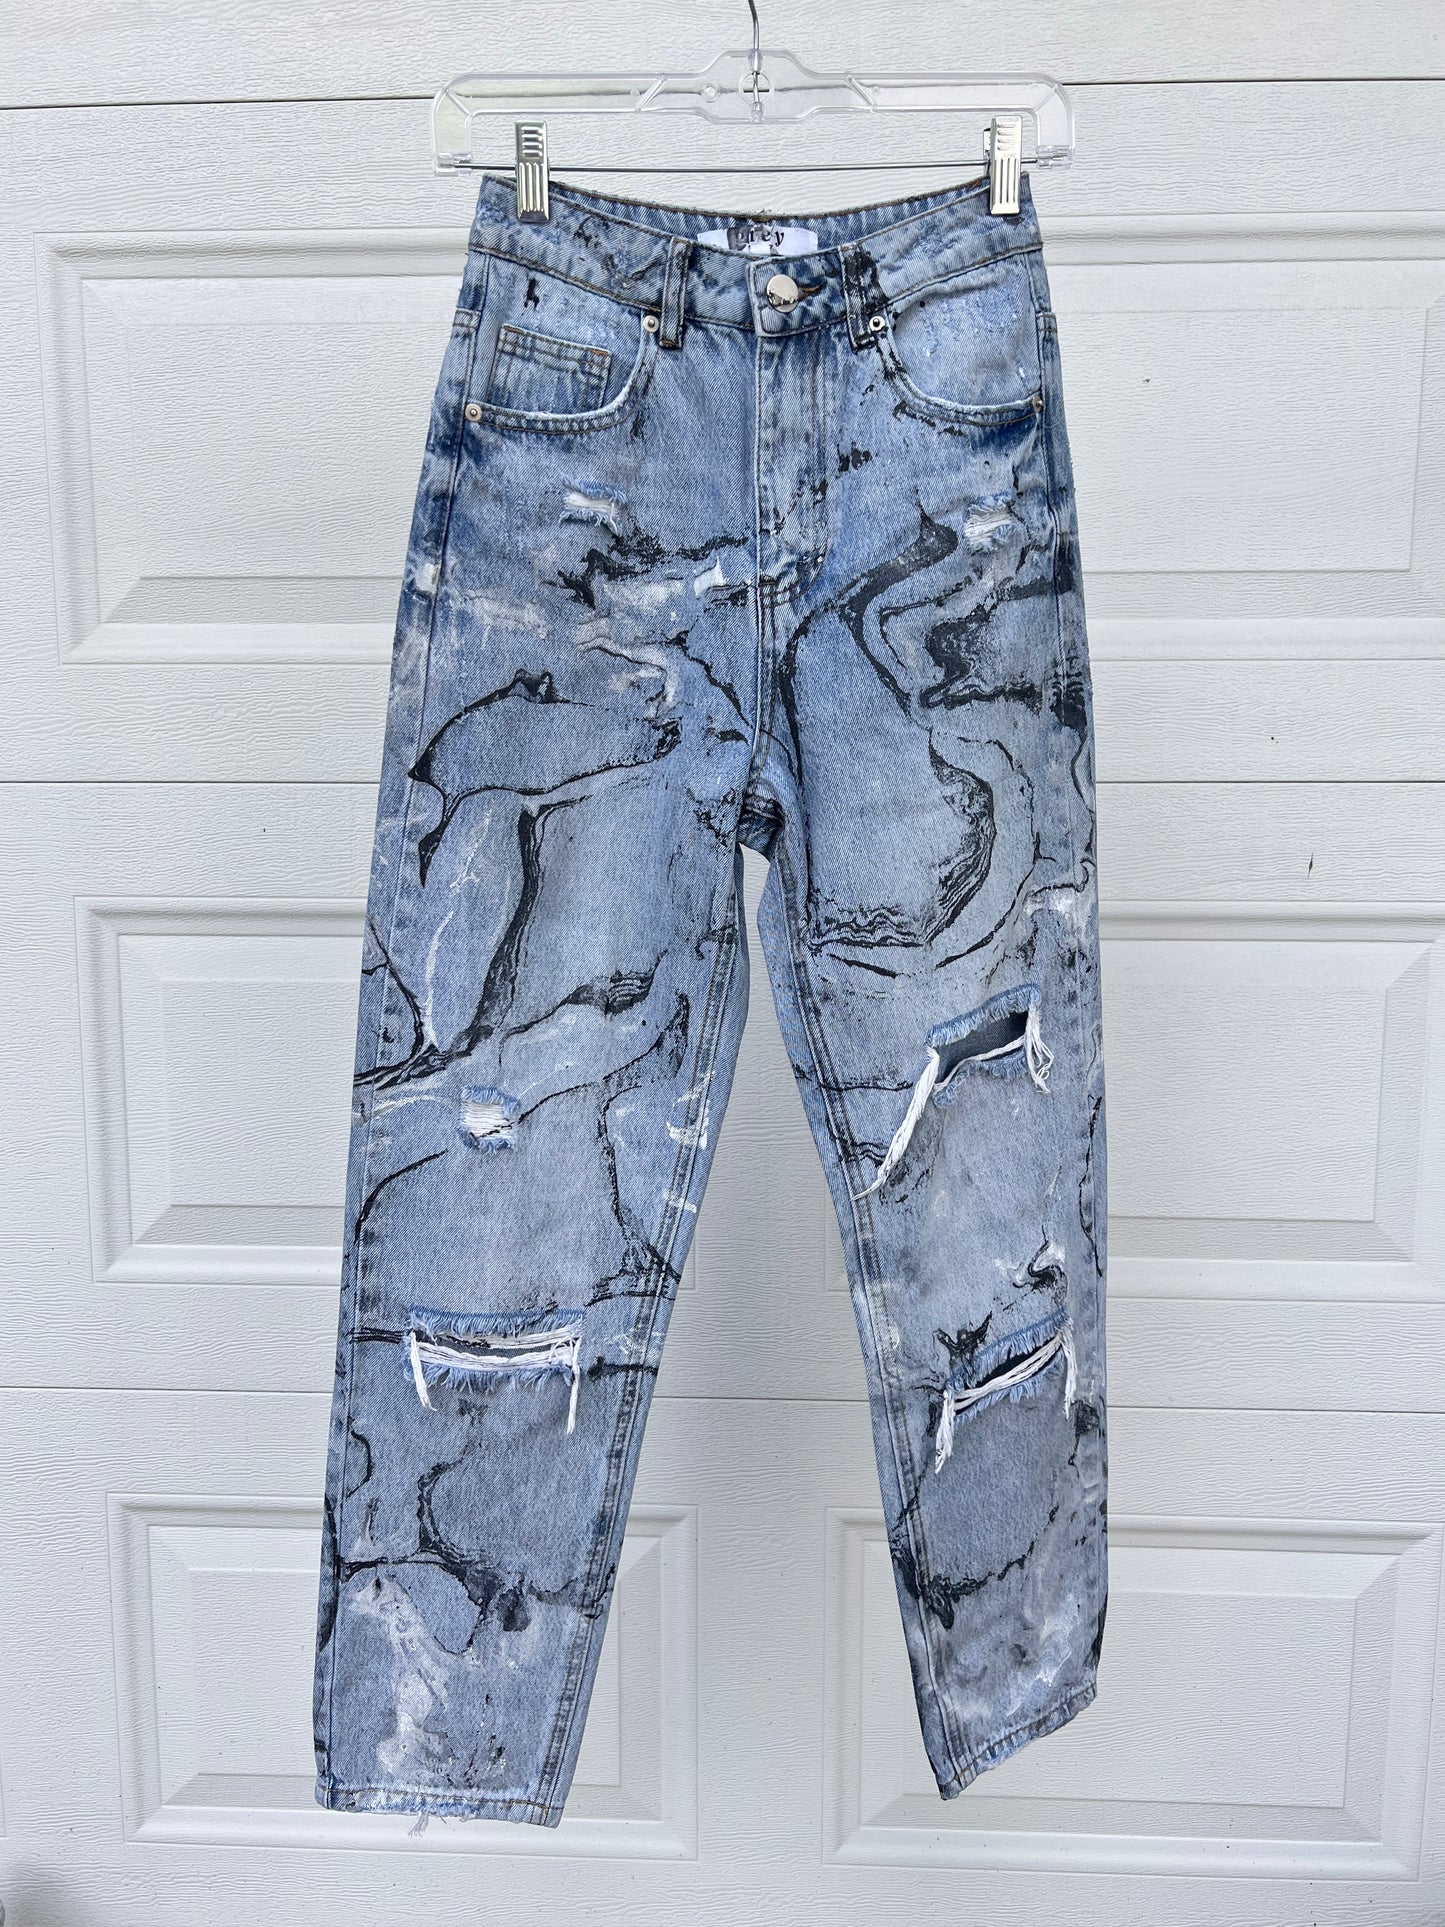 The Marbled Jeans - 24"